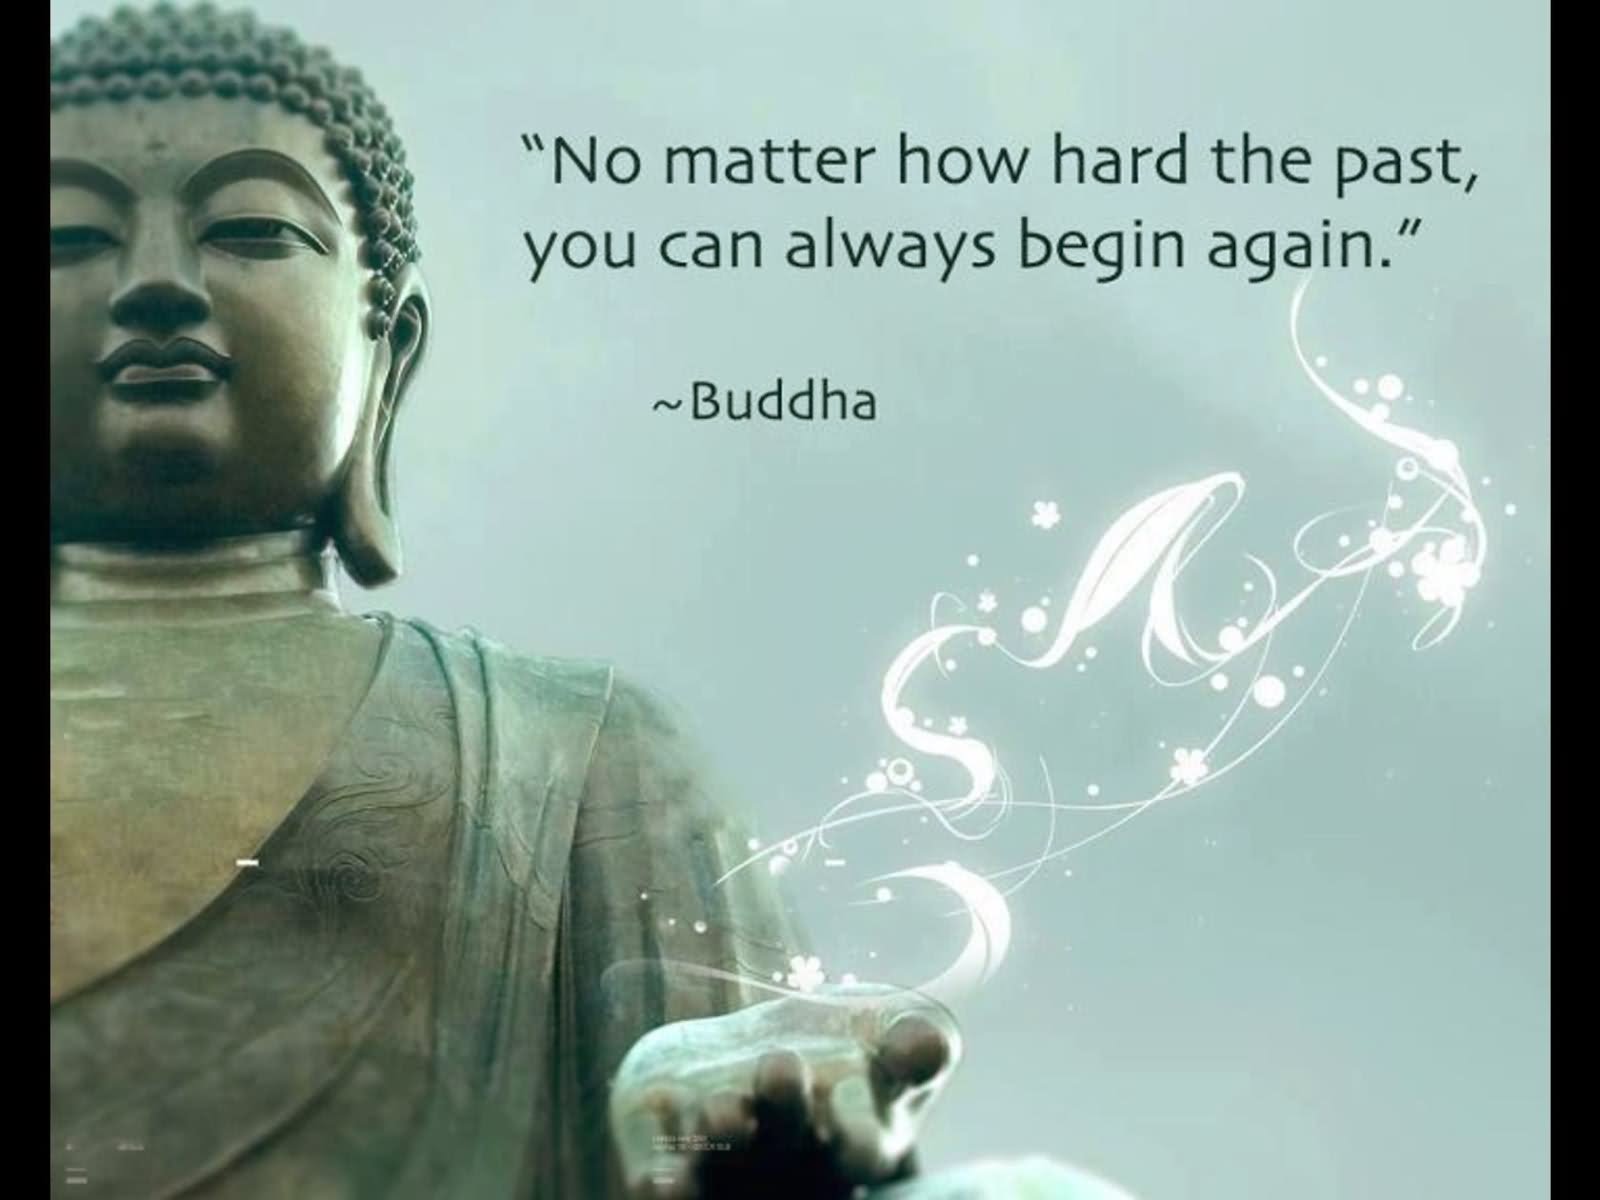 No matter how hard the past, you can always begin again. Buddha